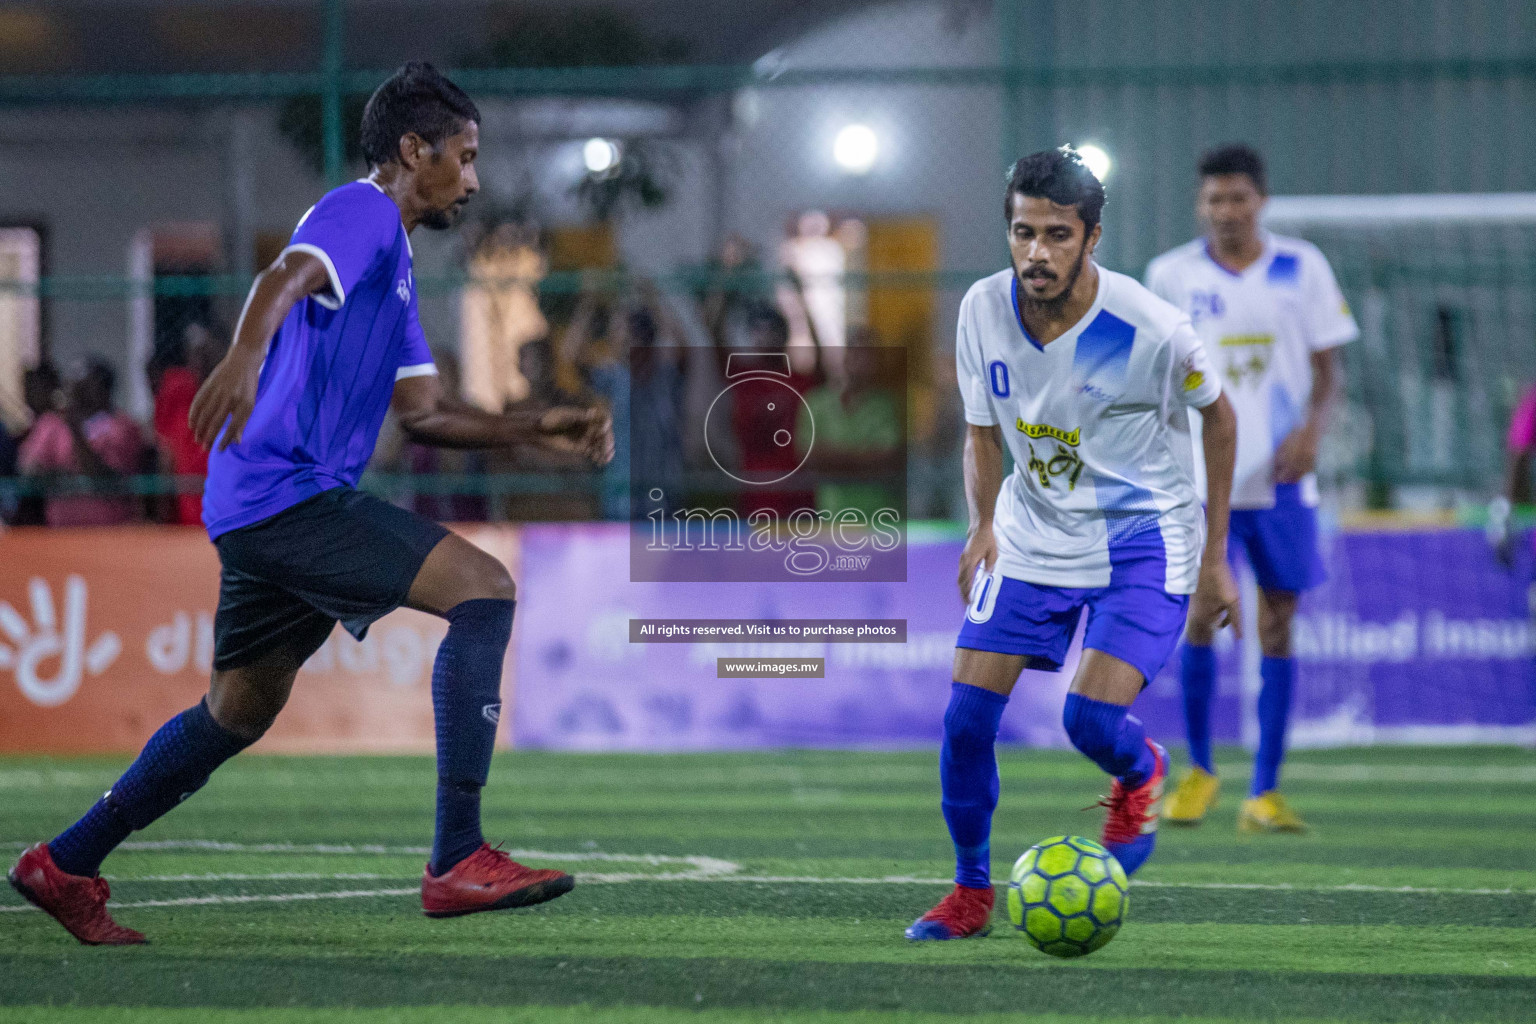 Club Maldives Day 10 in Hulhumale, Male', Maldives on 19th April 2019 Photos: Ismail Thoriq /images.mv